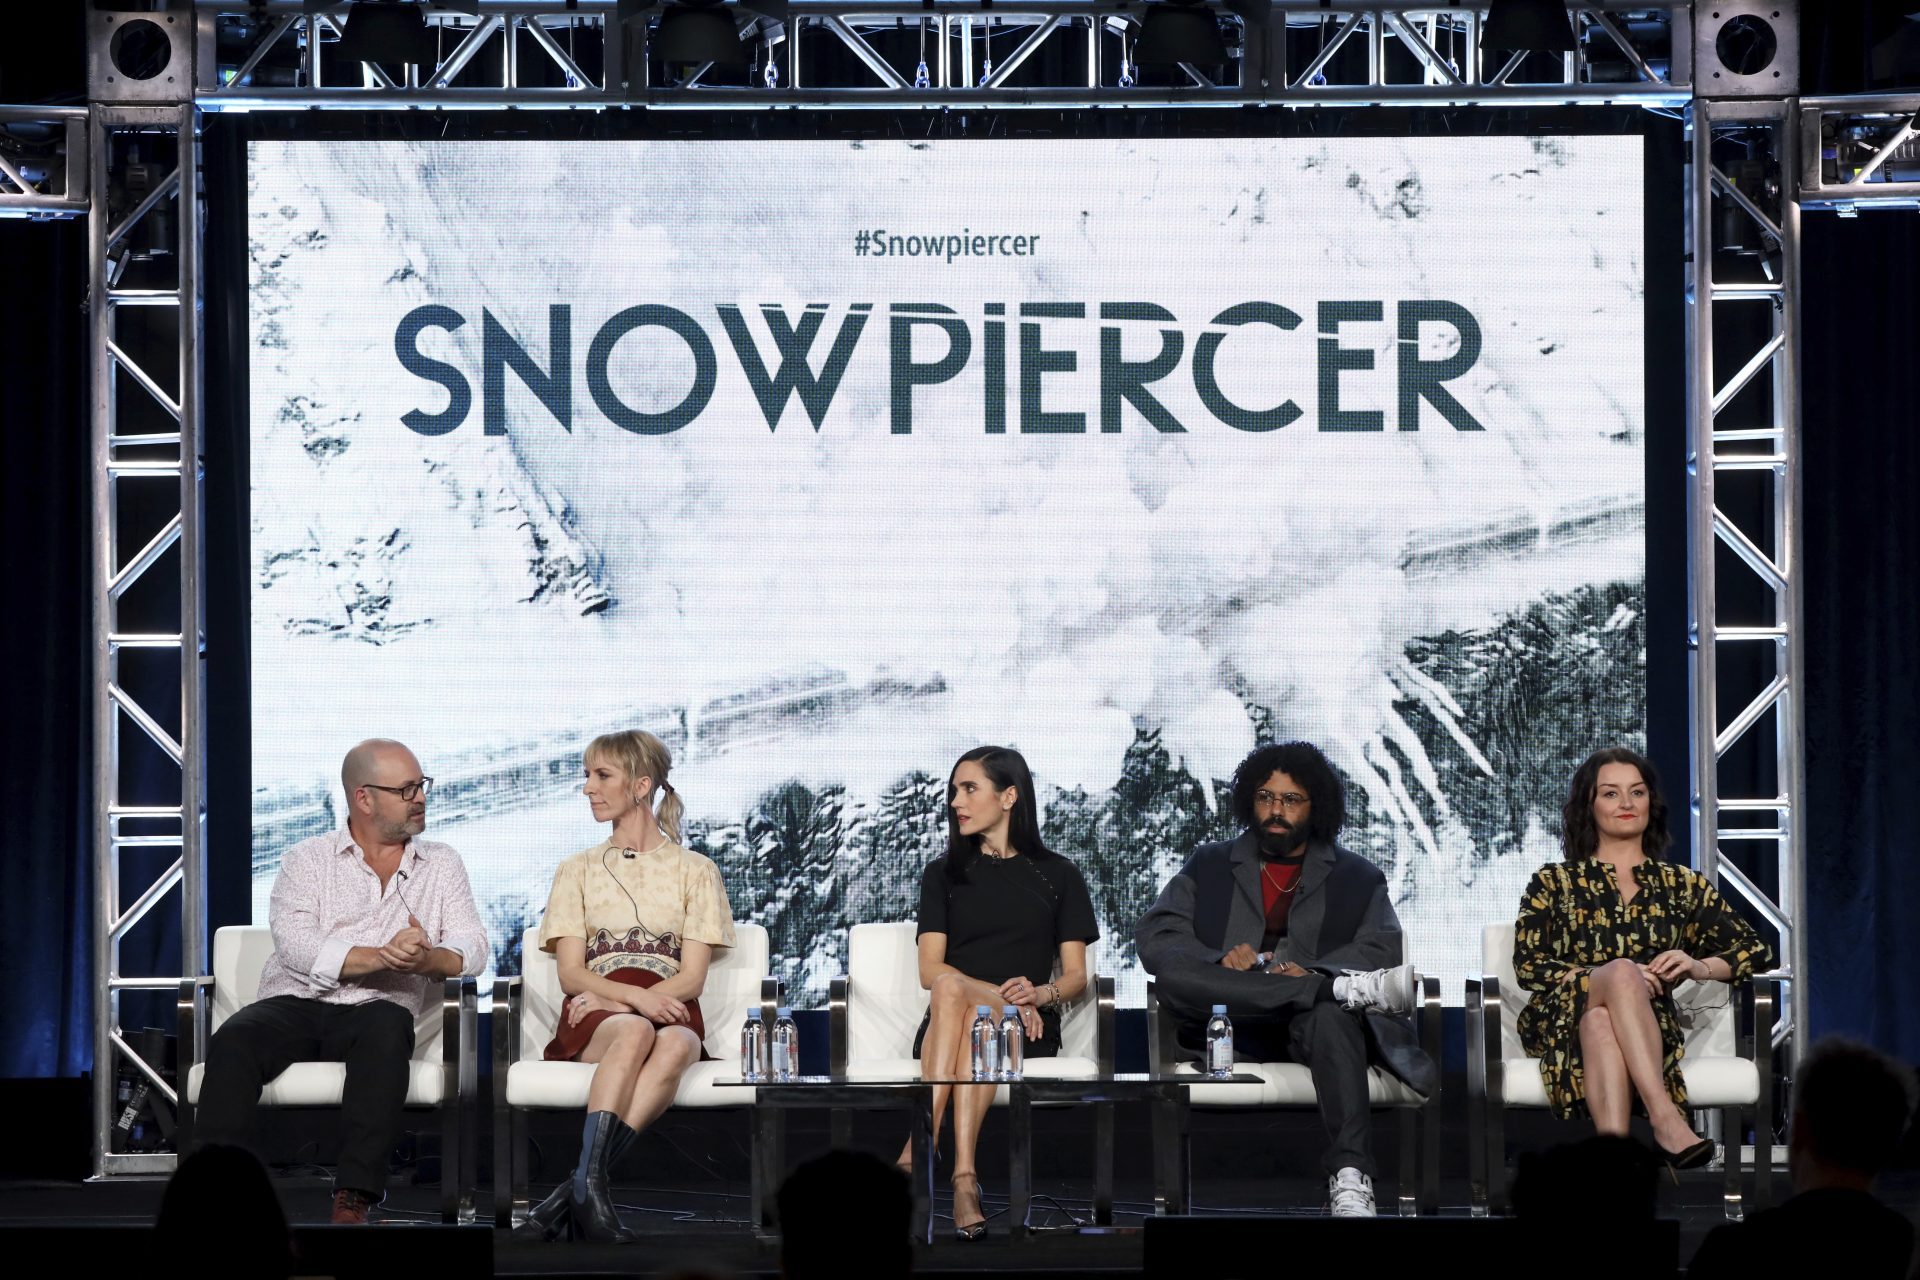 Snowpiercer cast and crew panel discussion